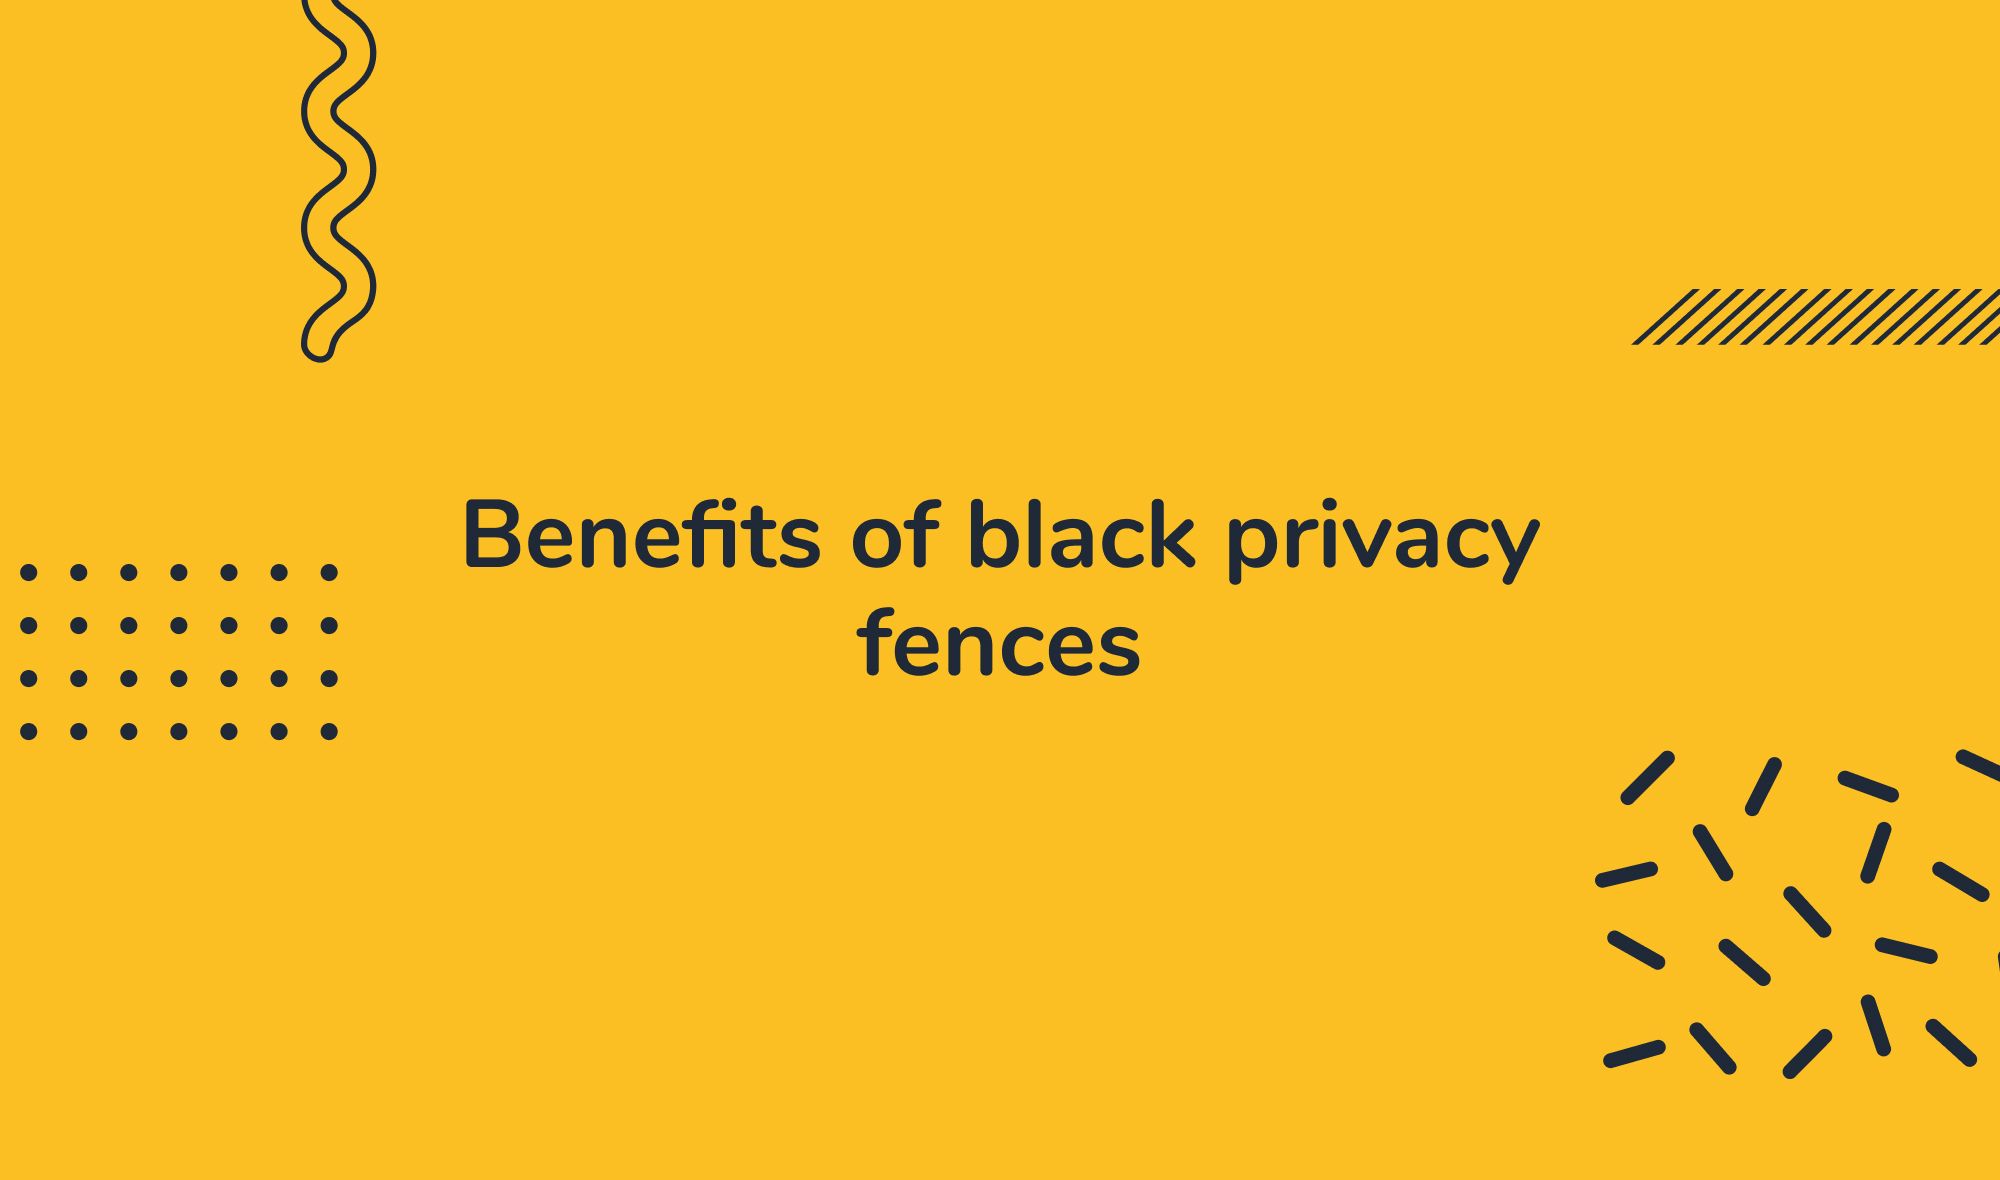 Benefits of black privacy fences